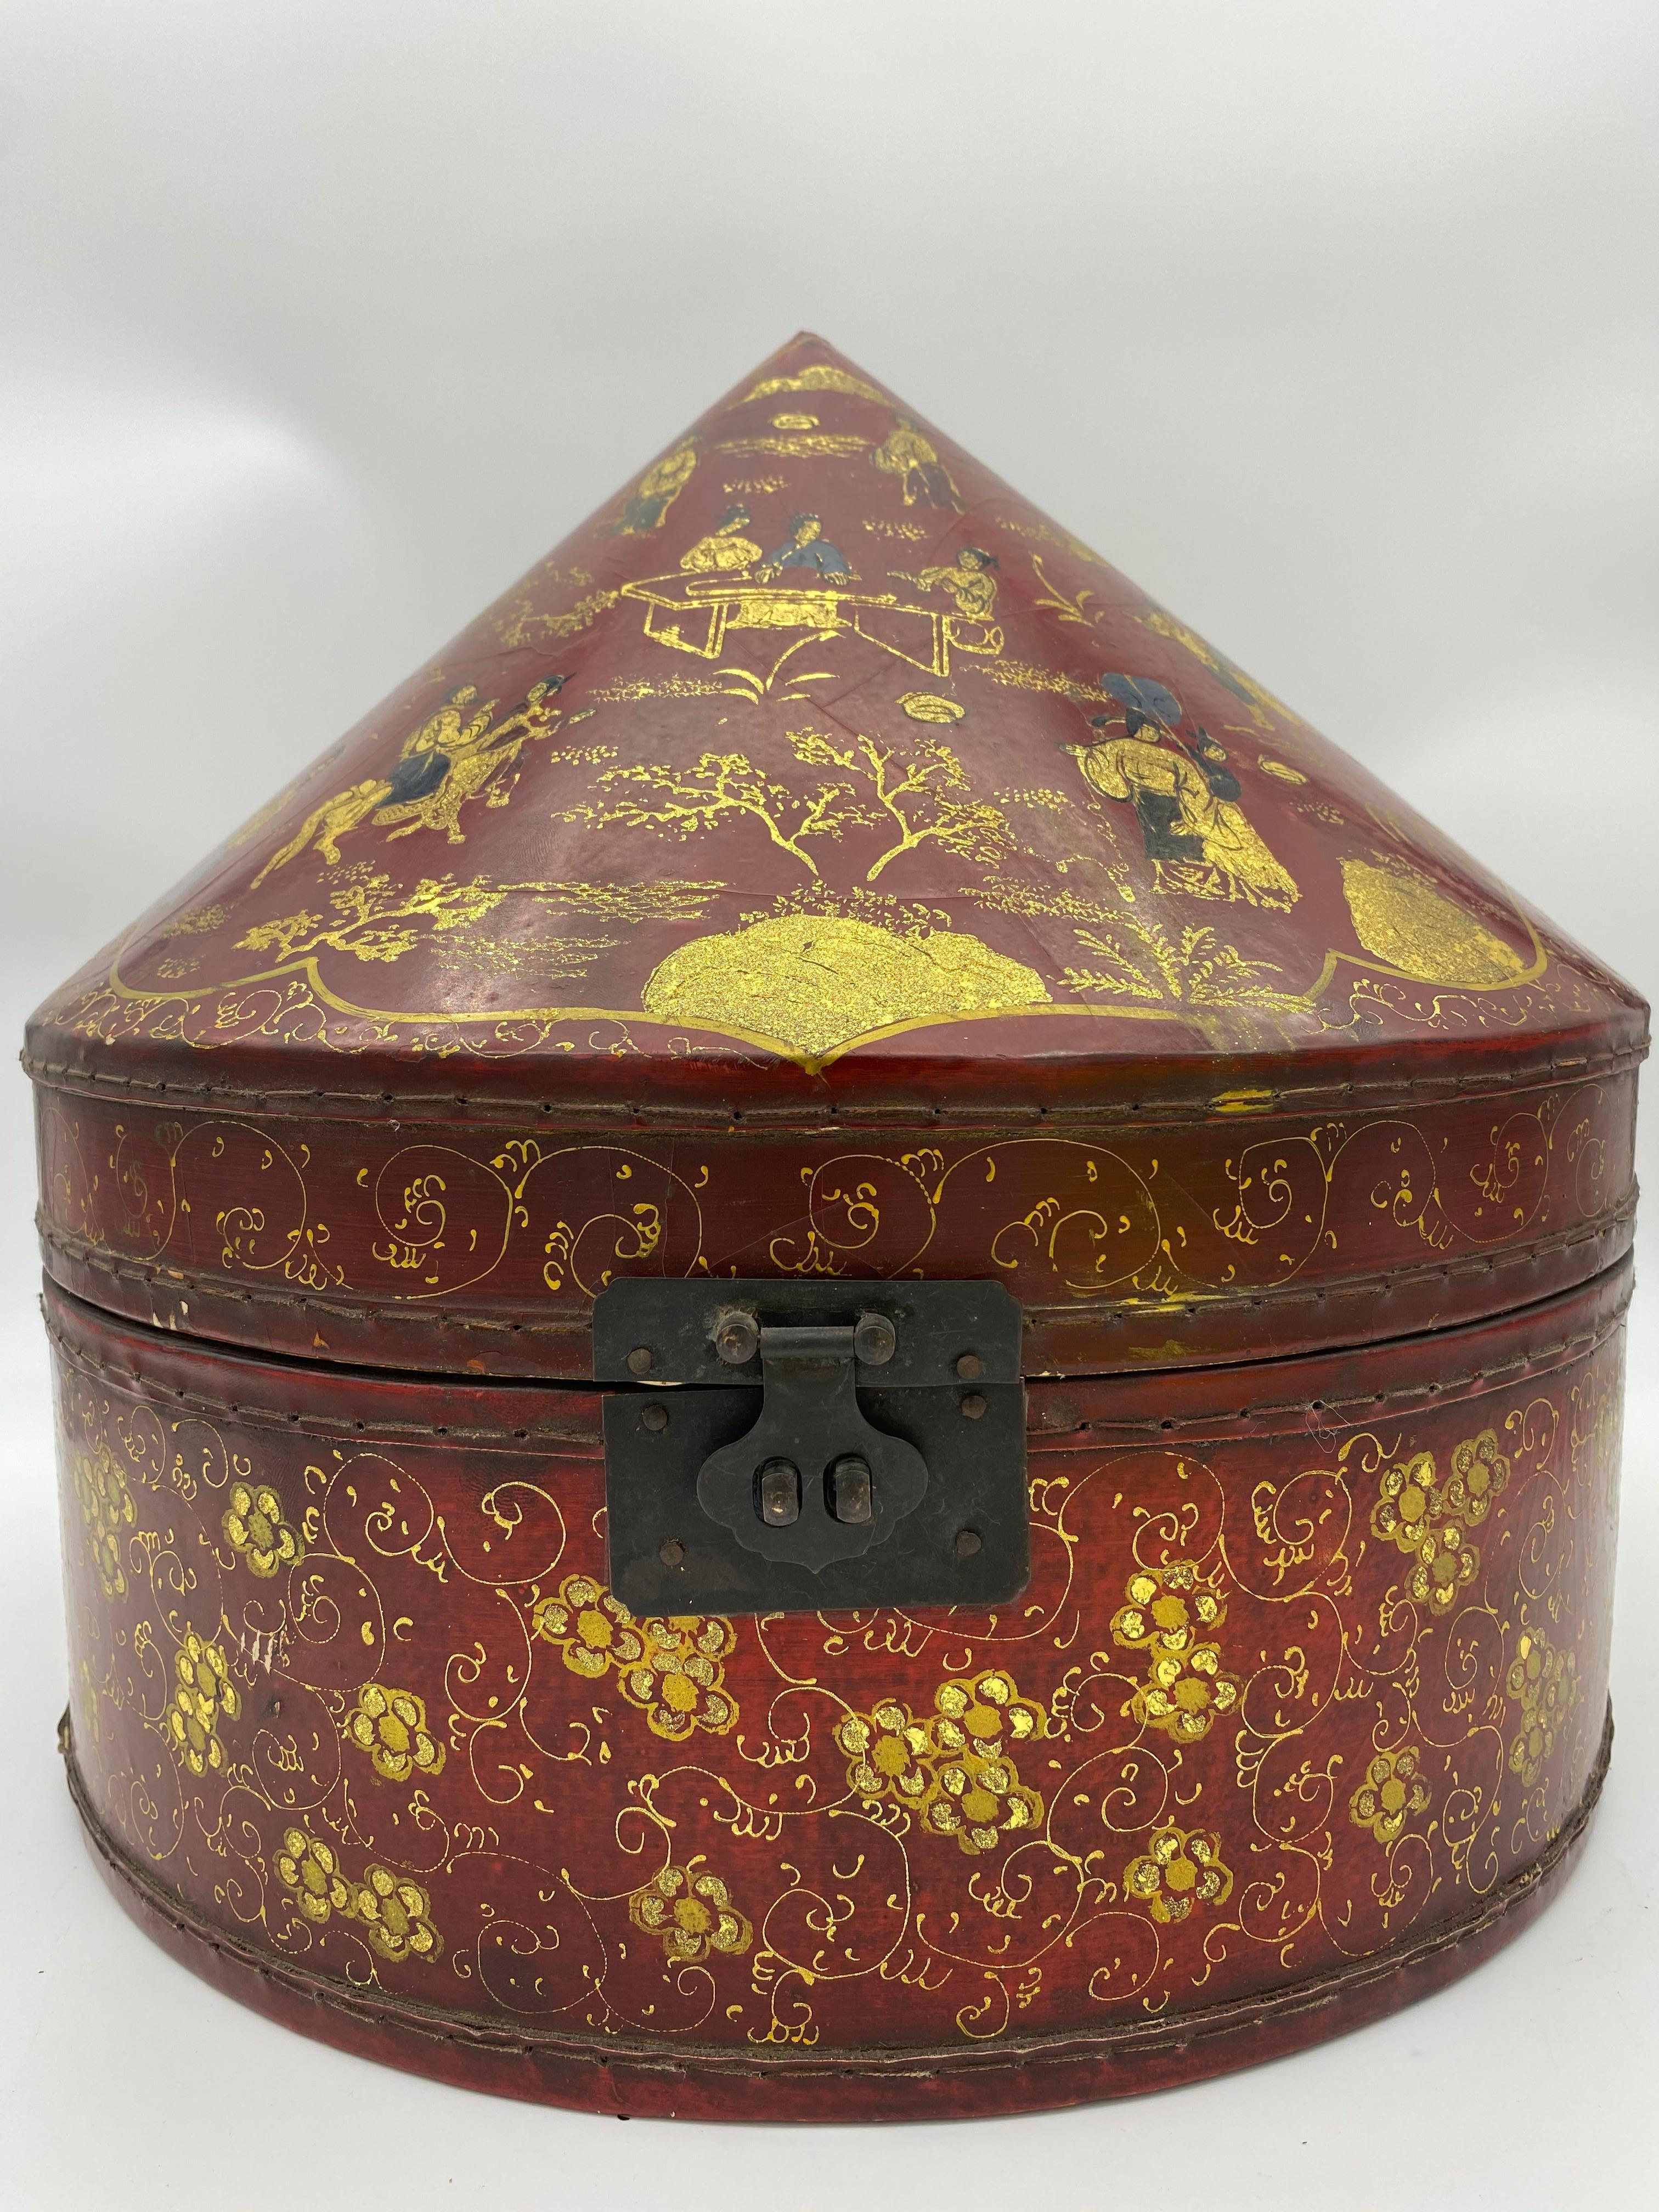 Antique Chinese lacquer leather hat box with gold paint.